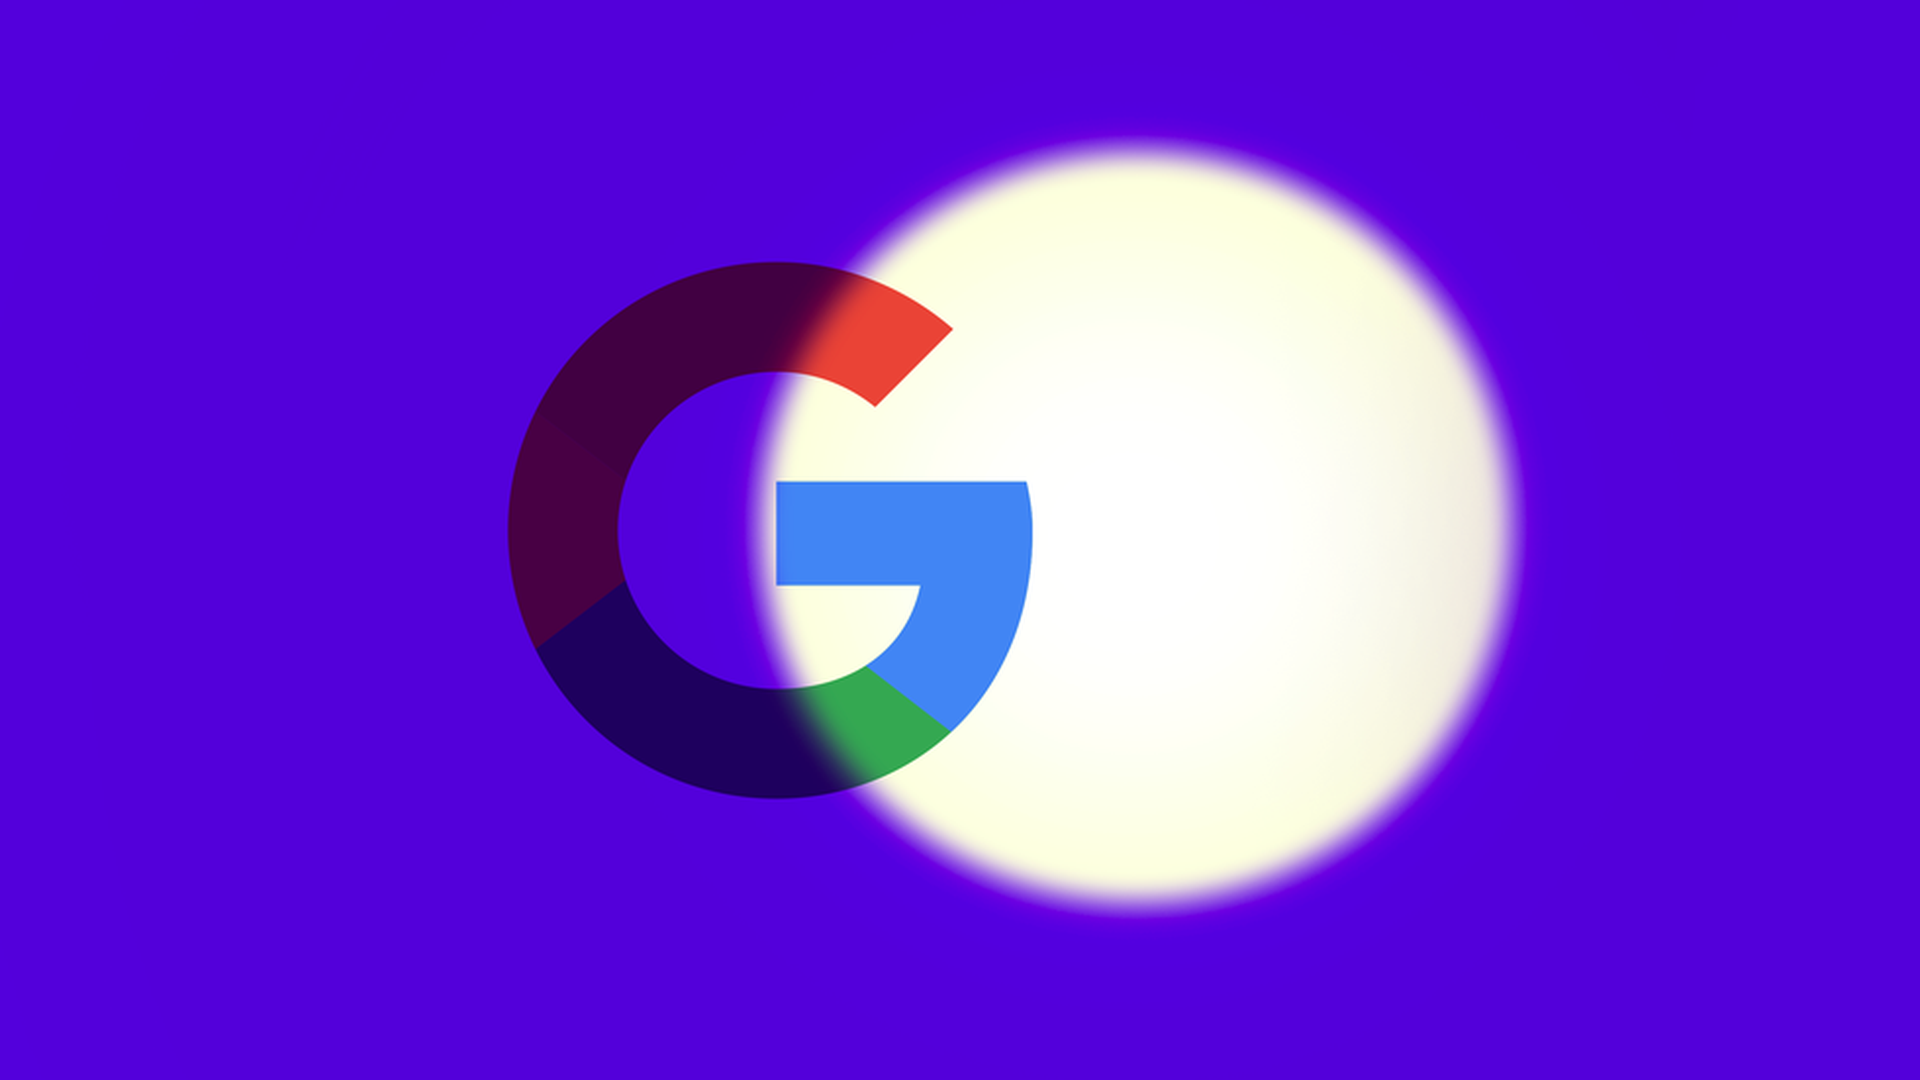 Illustration of Google "G" symbol with spotlight on it but only partially